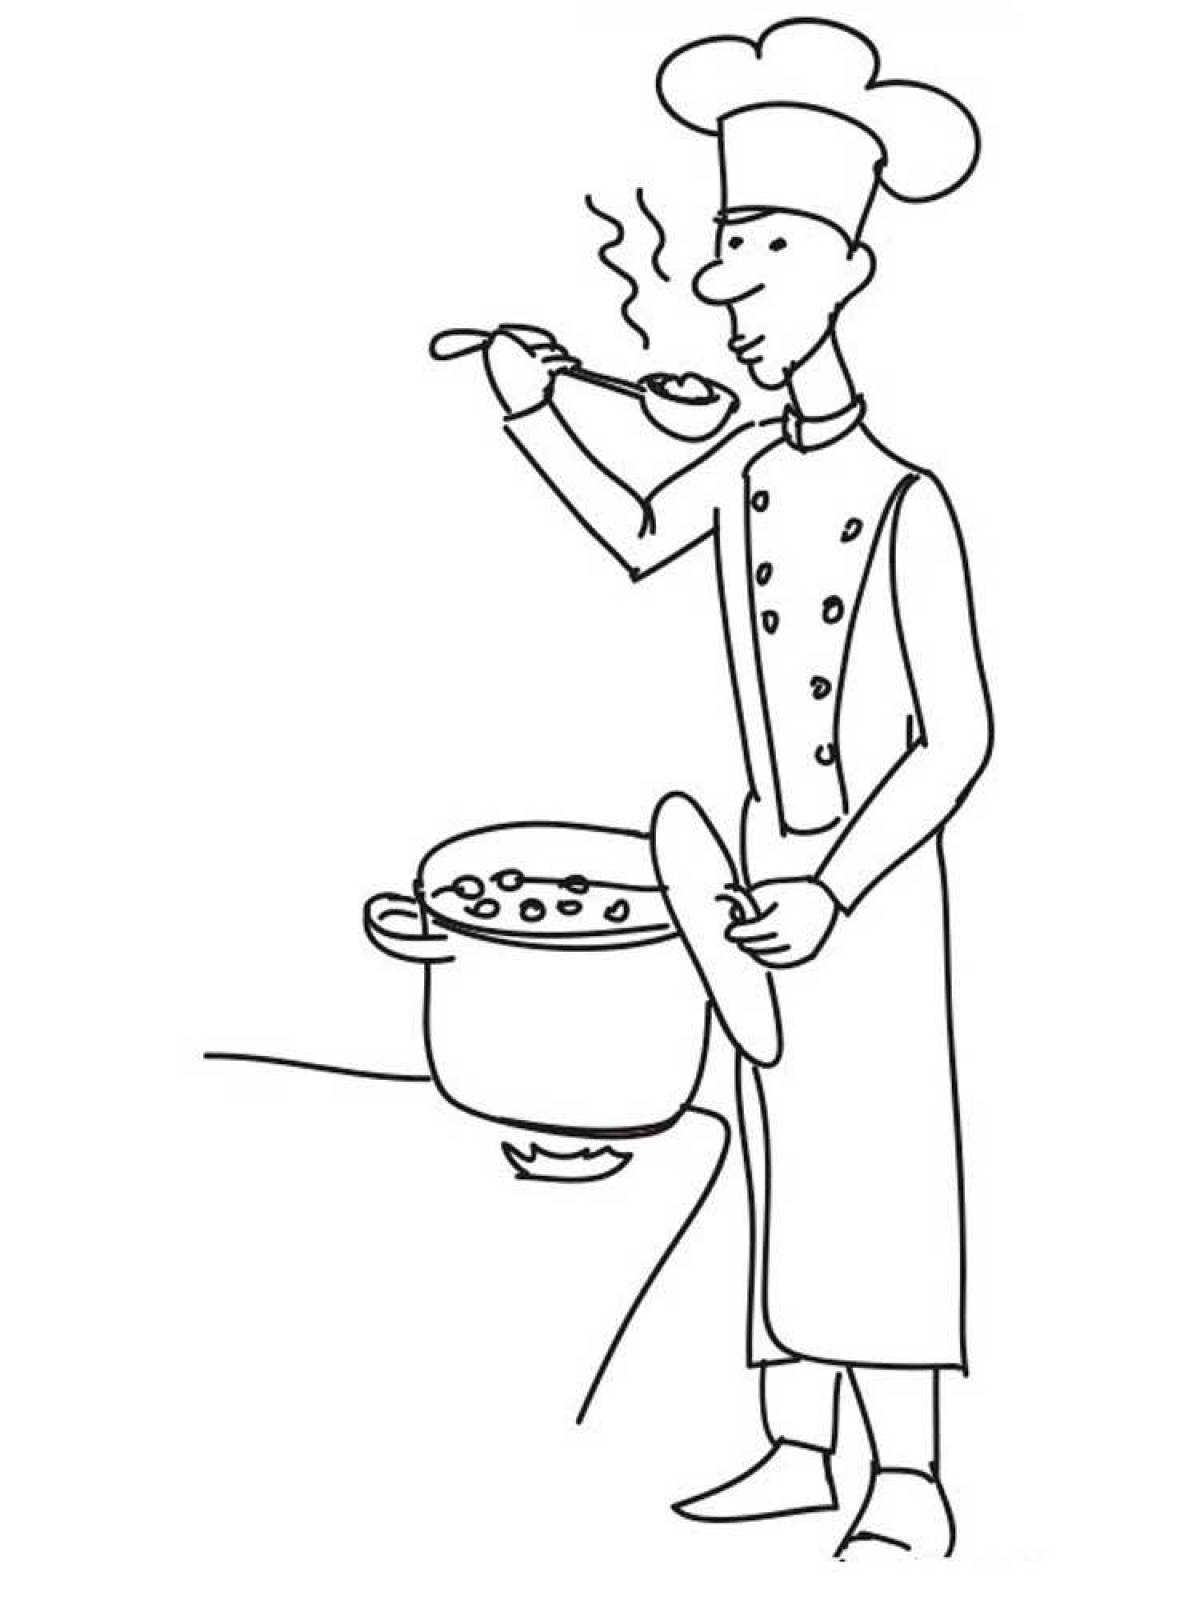 Inspirational cooking coloring book for kids